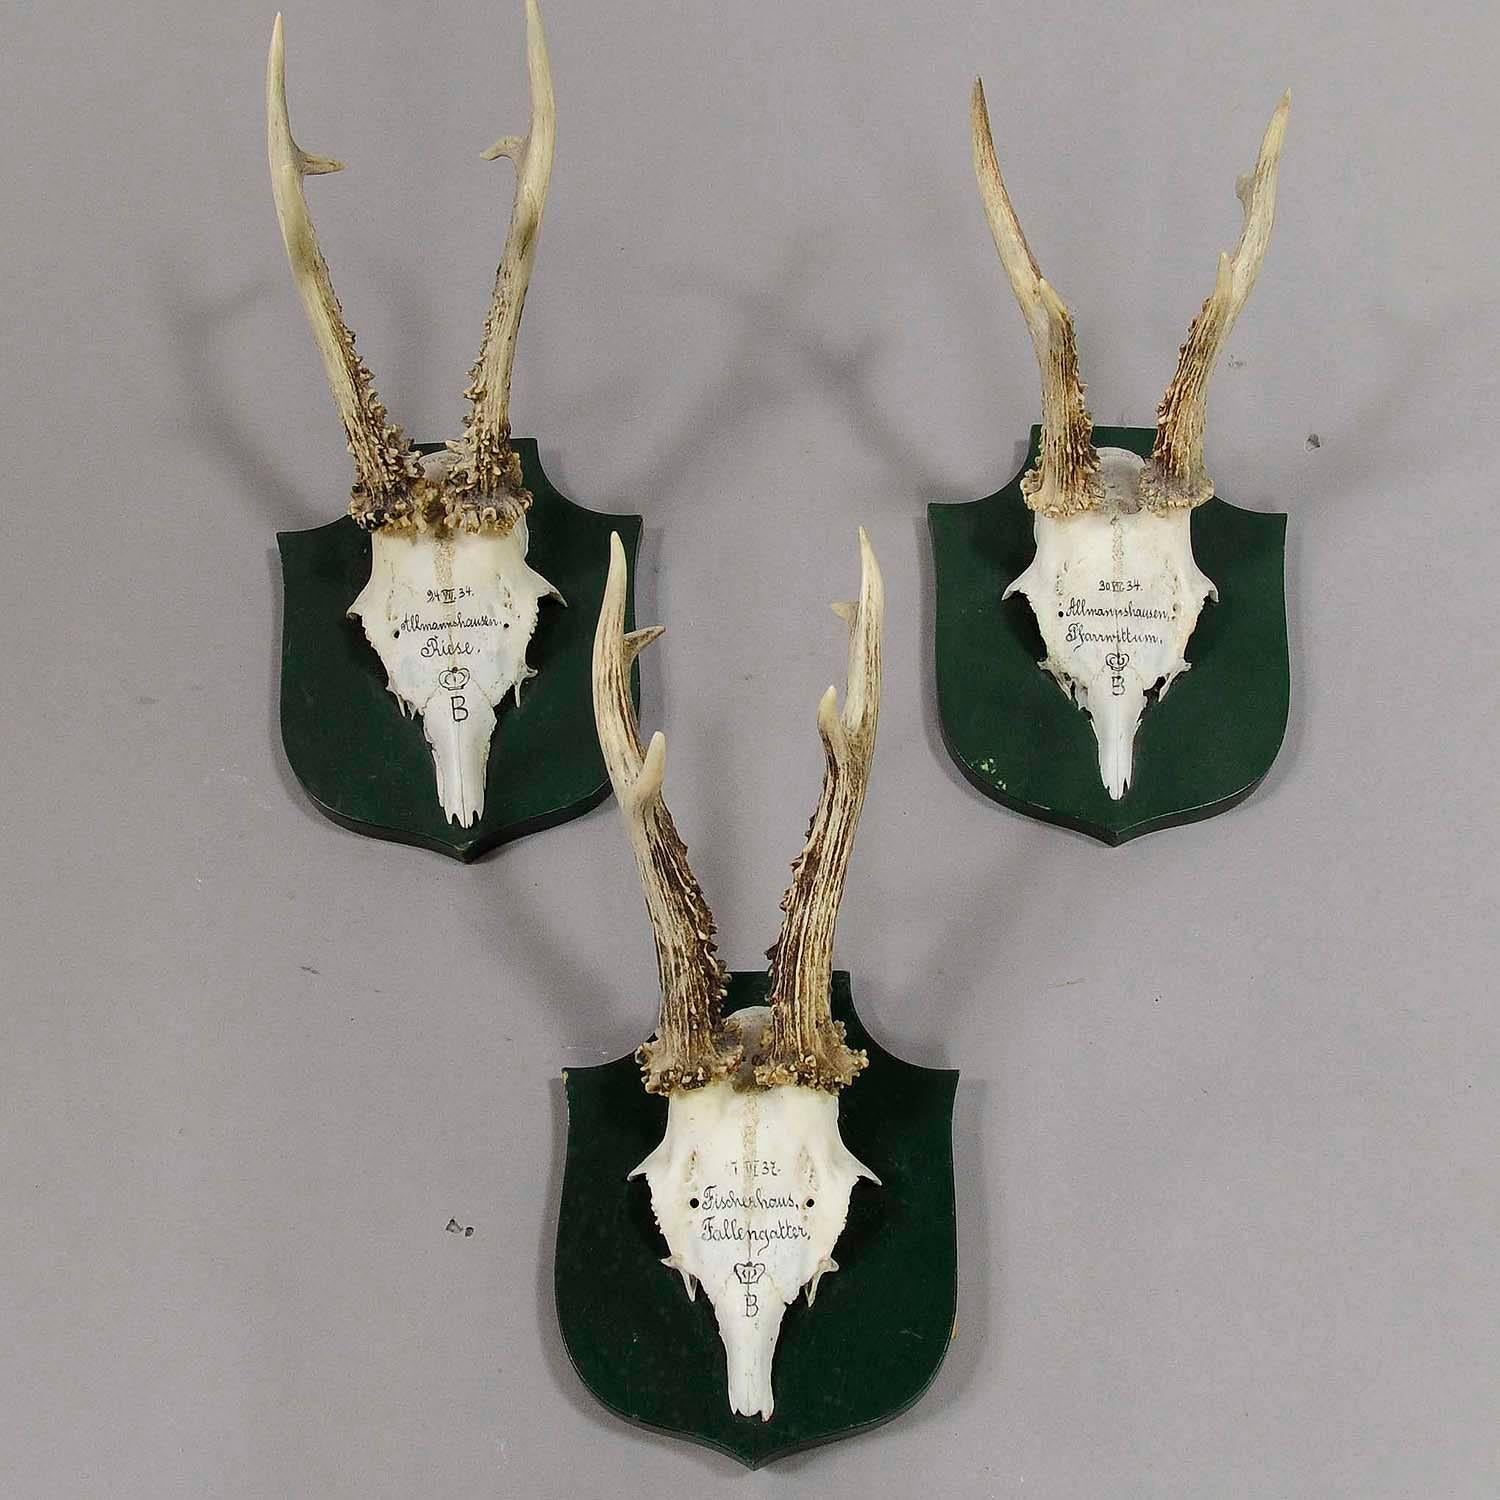 Rustic Great Deer Trophies on Plaques from Palace Salem, Germany